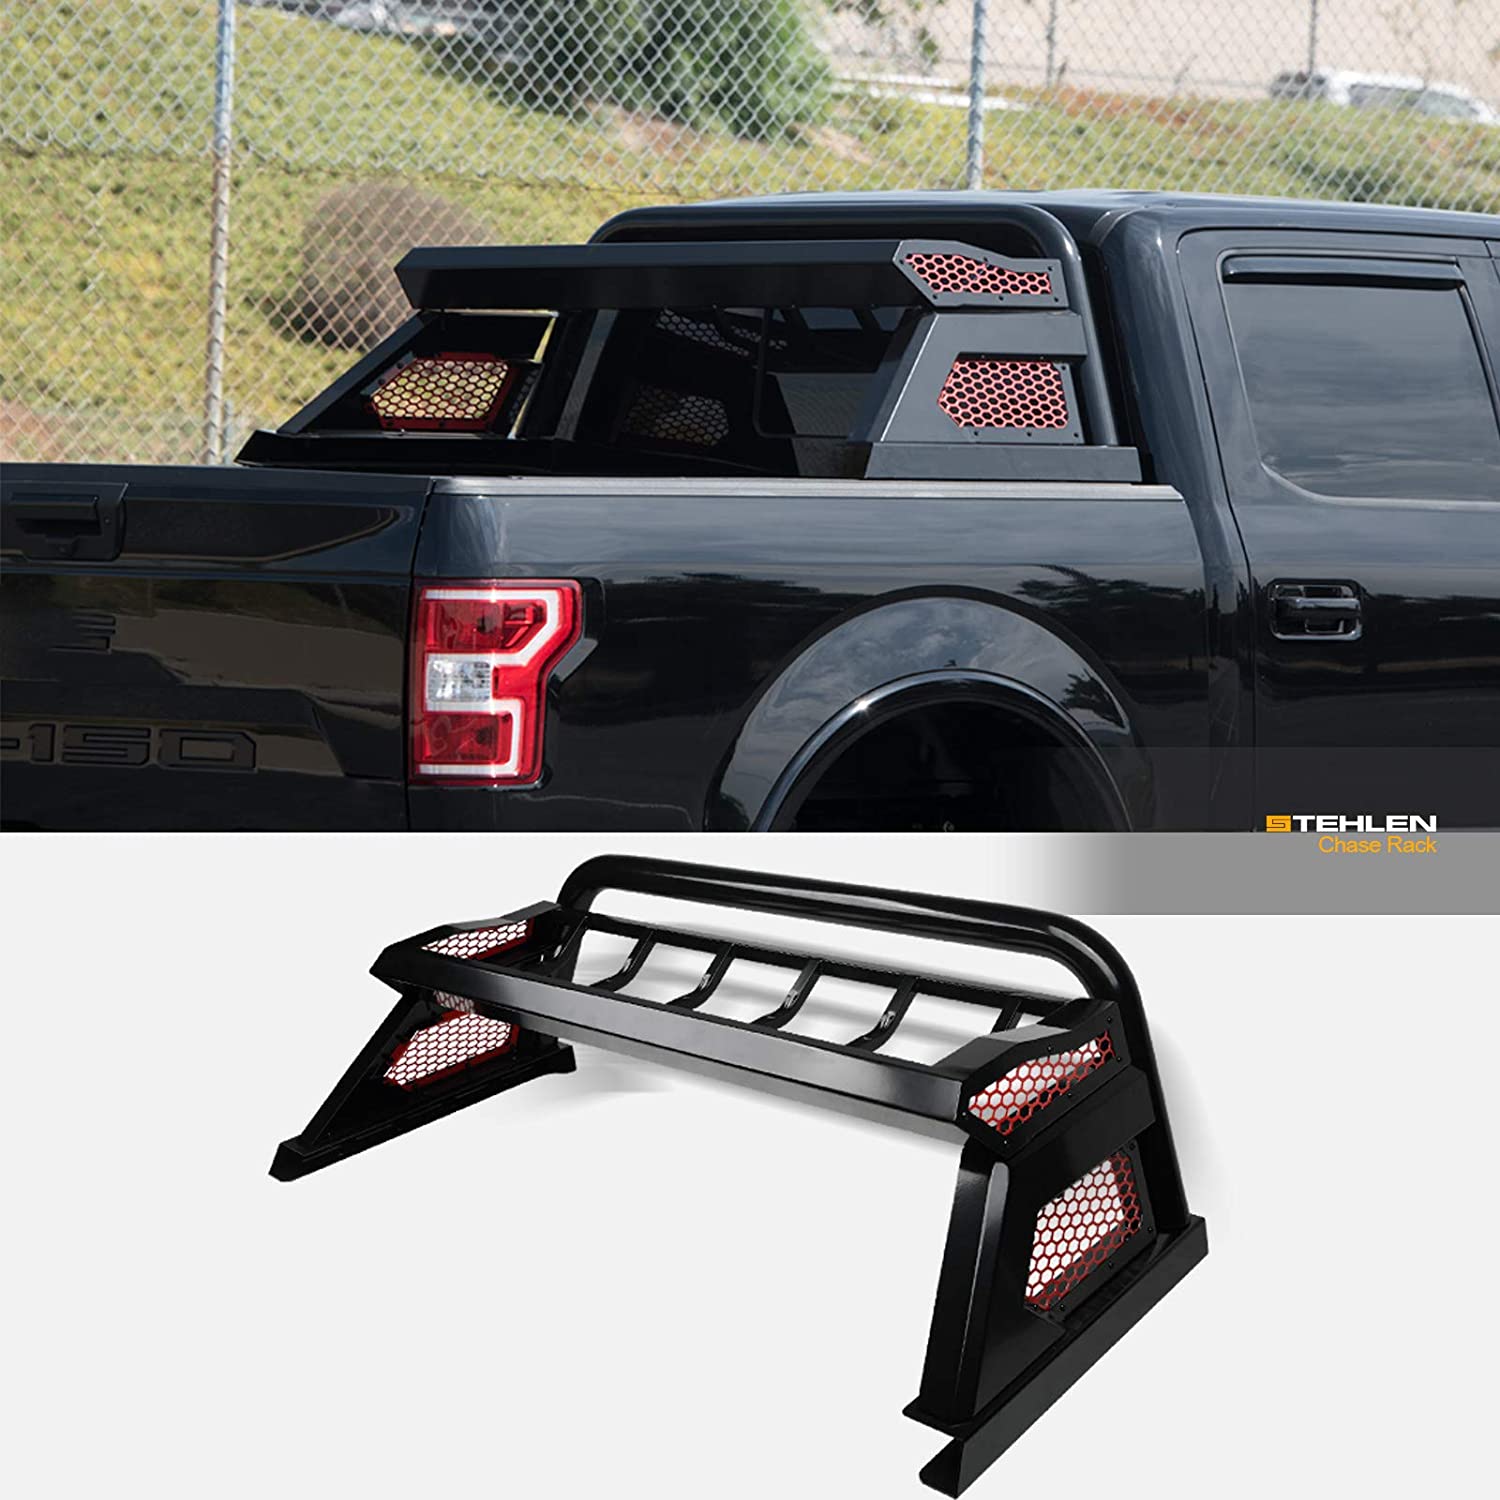 Stehlen 642167823087 Matte Black Cargo Basket Style Truck Bed Chase Rack with Red Honeycomb Mesh Cage For 2007-2019 Toyota Tundra